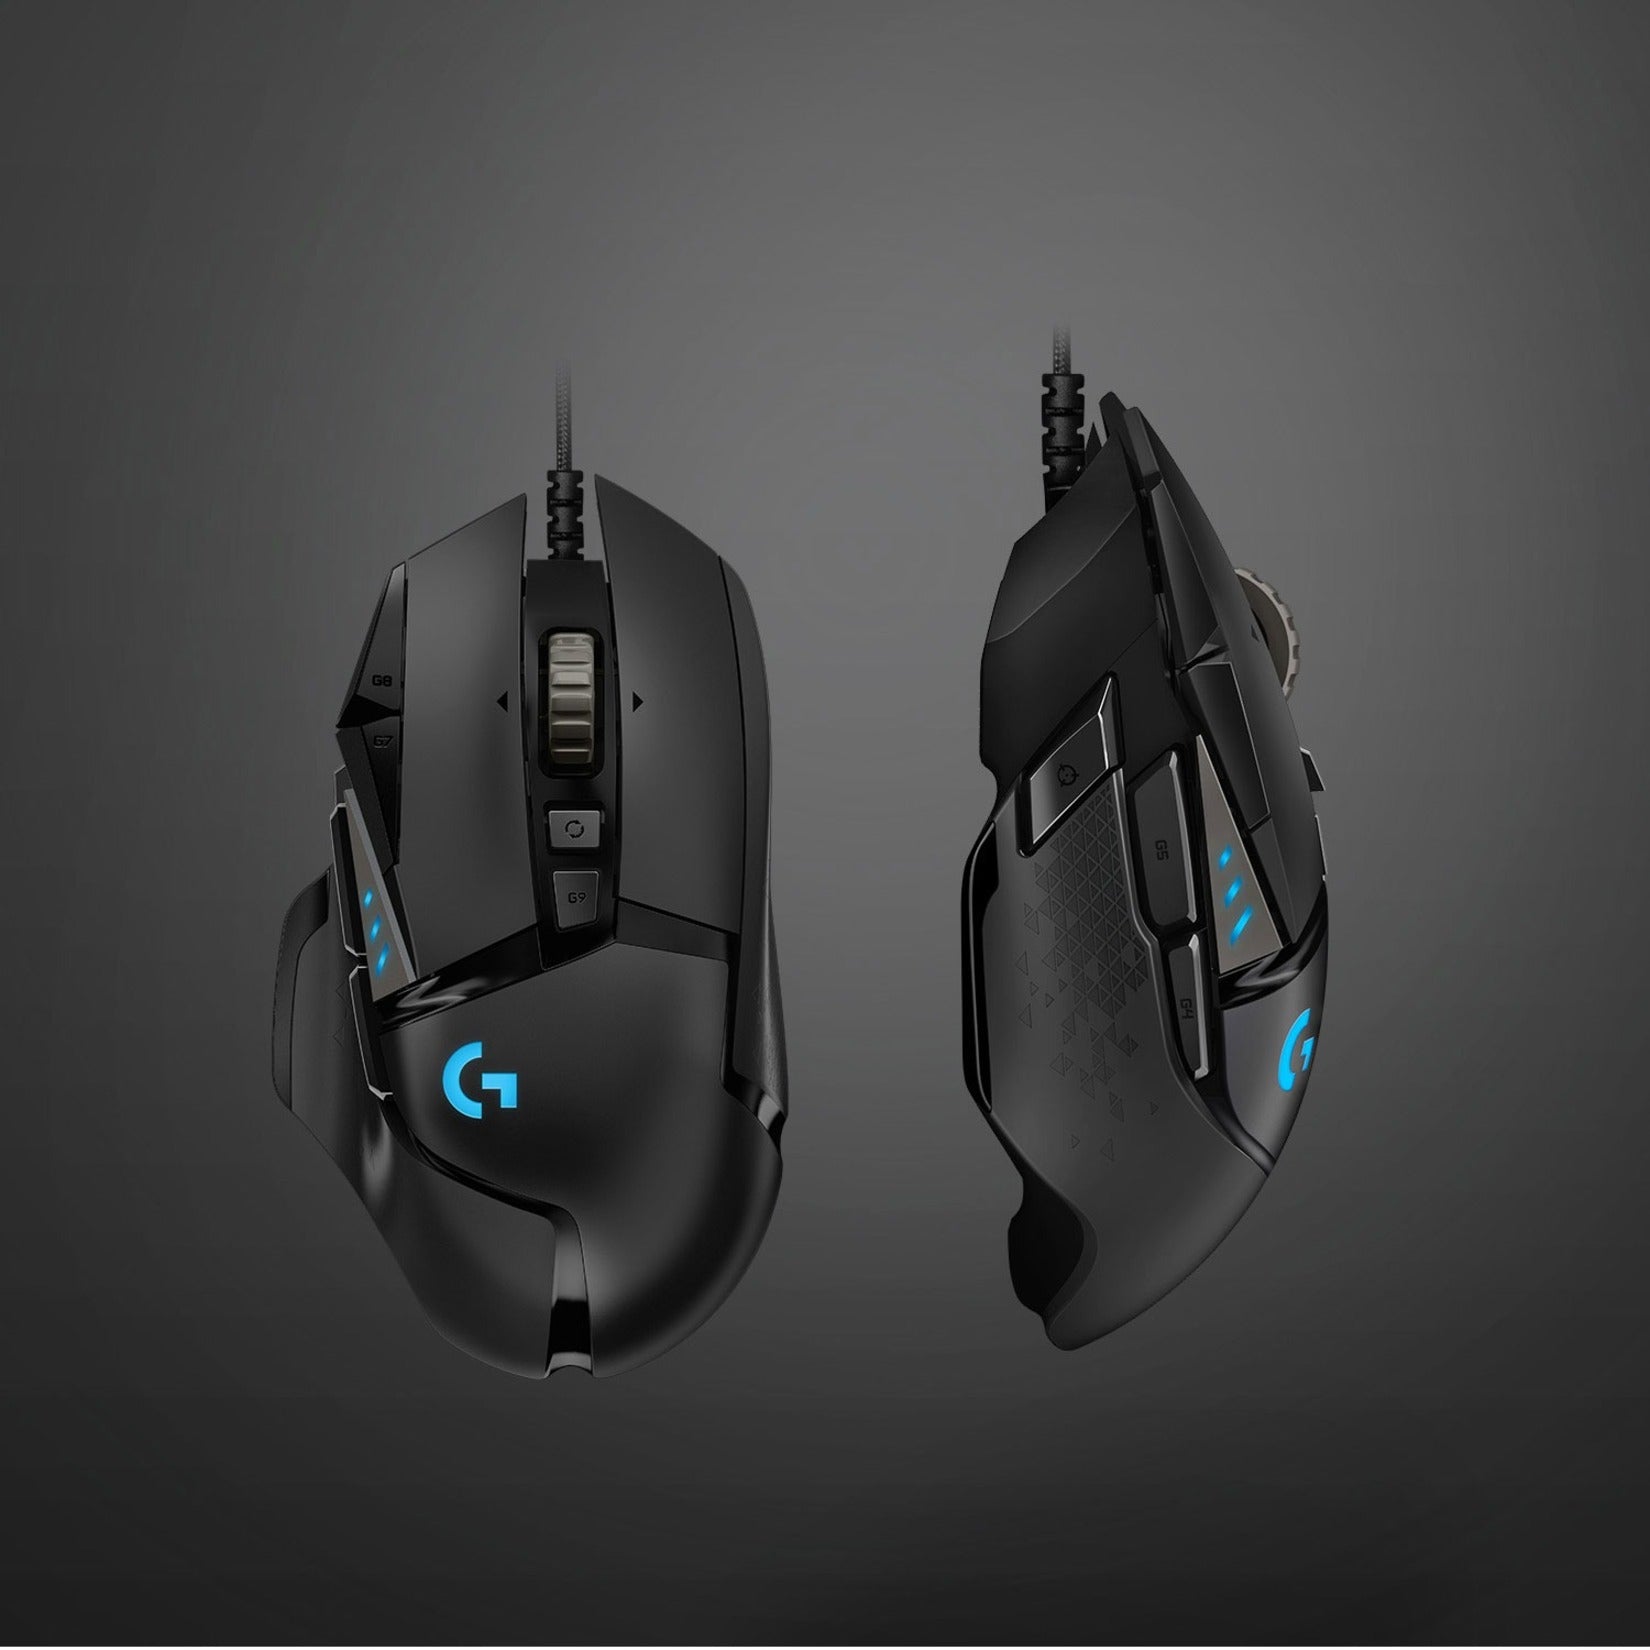 Logitech 910005469 G502 HERO High Performance Gaming Mouse, 16000 dpi, 11 Buttons, USB